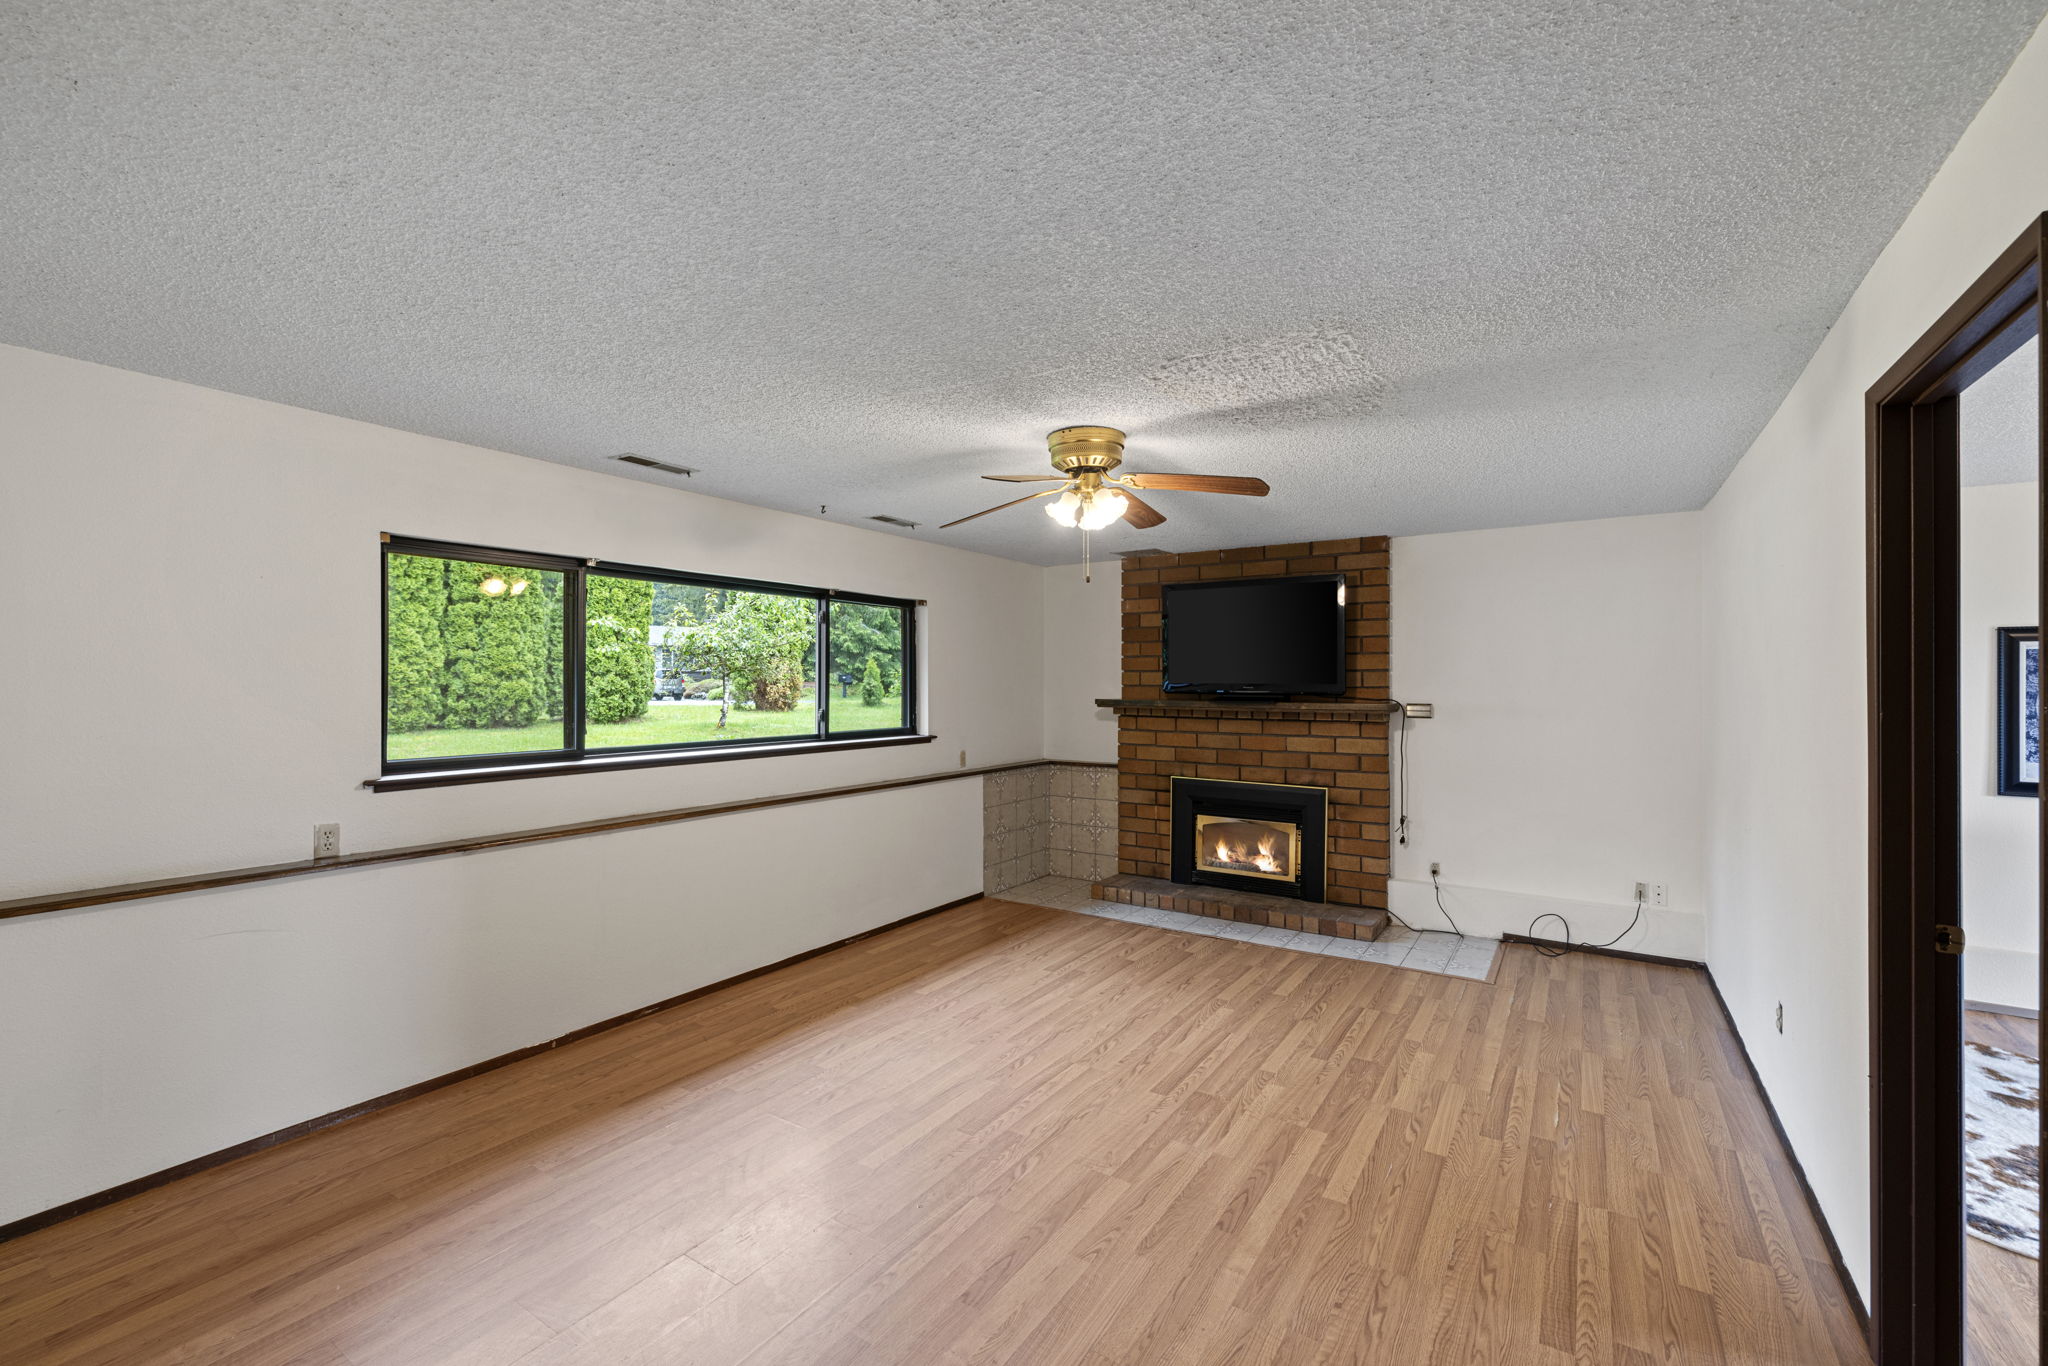 Recreation Room with propane fireplace.